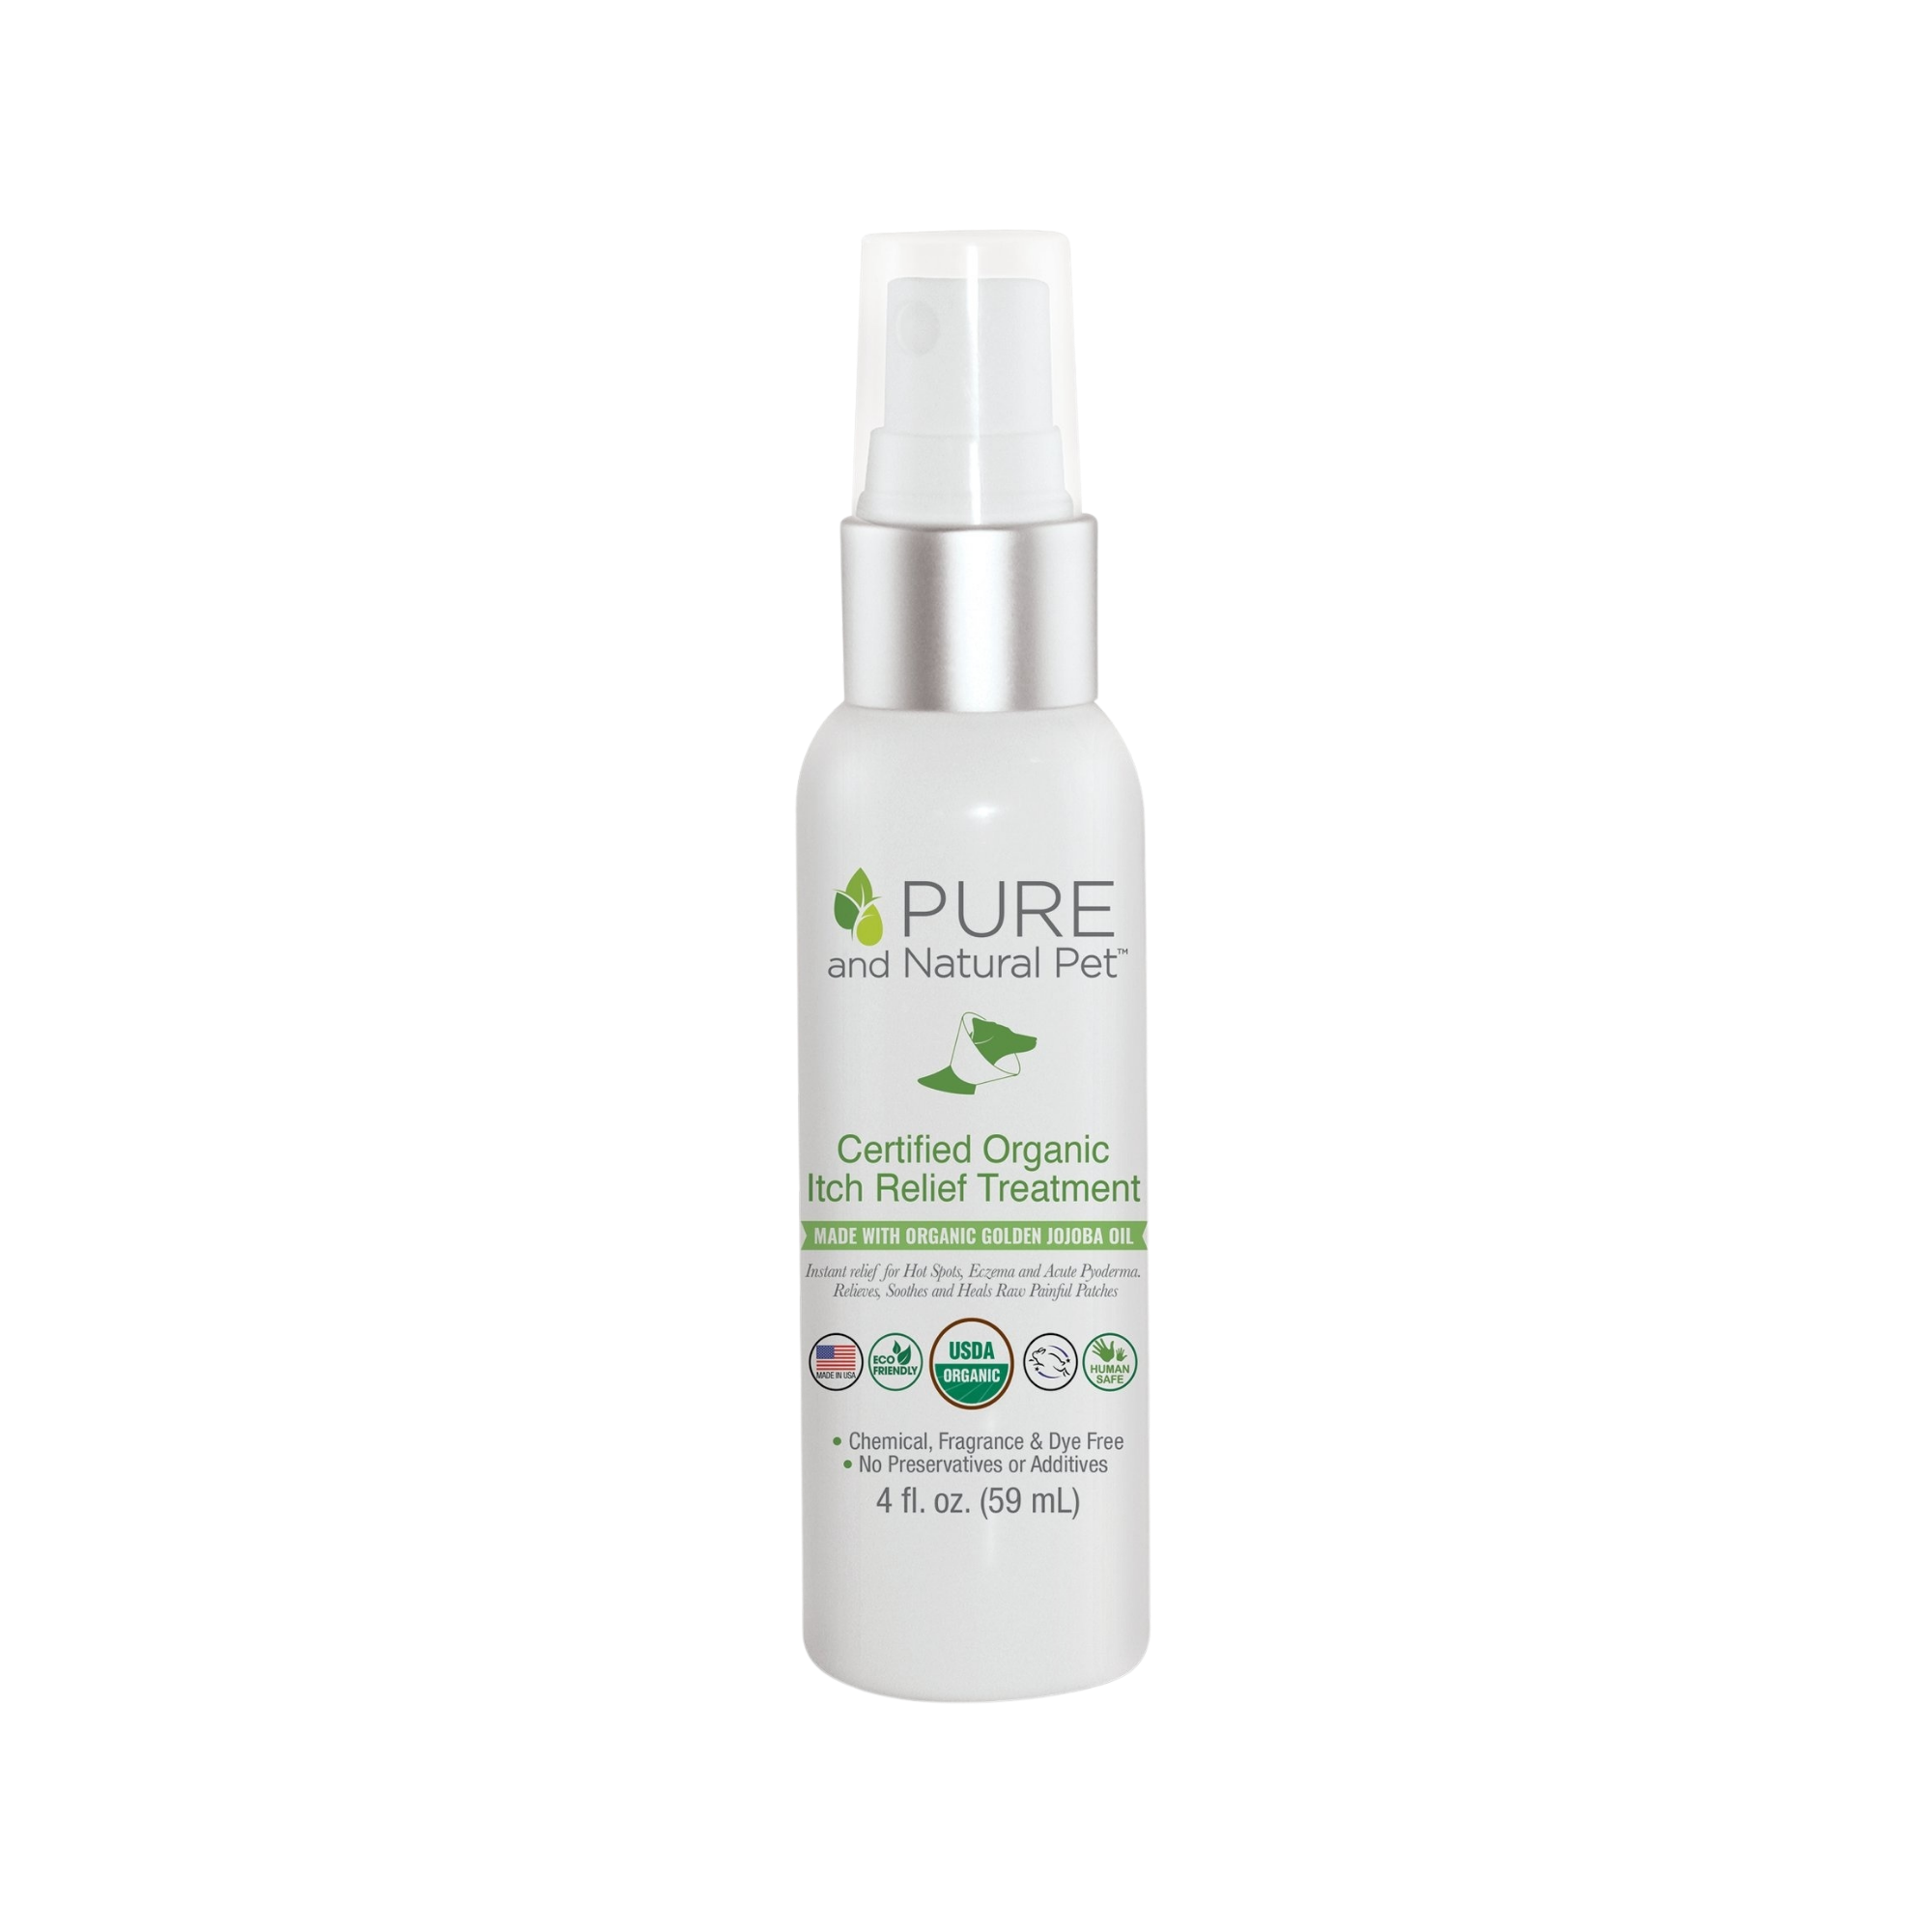 Pure and Natural Pet Itch Relief & Hot Spot Oil Spray for Dogs 4oz - Mutts & Co.